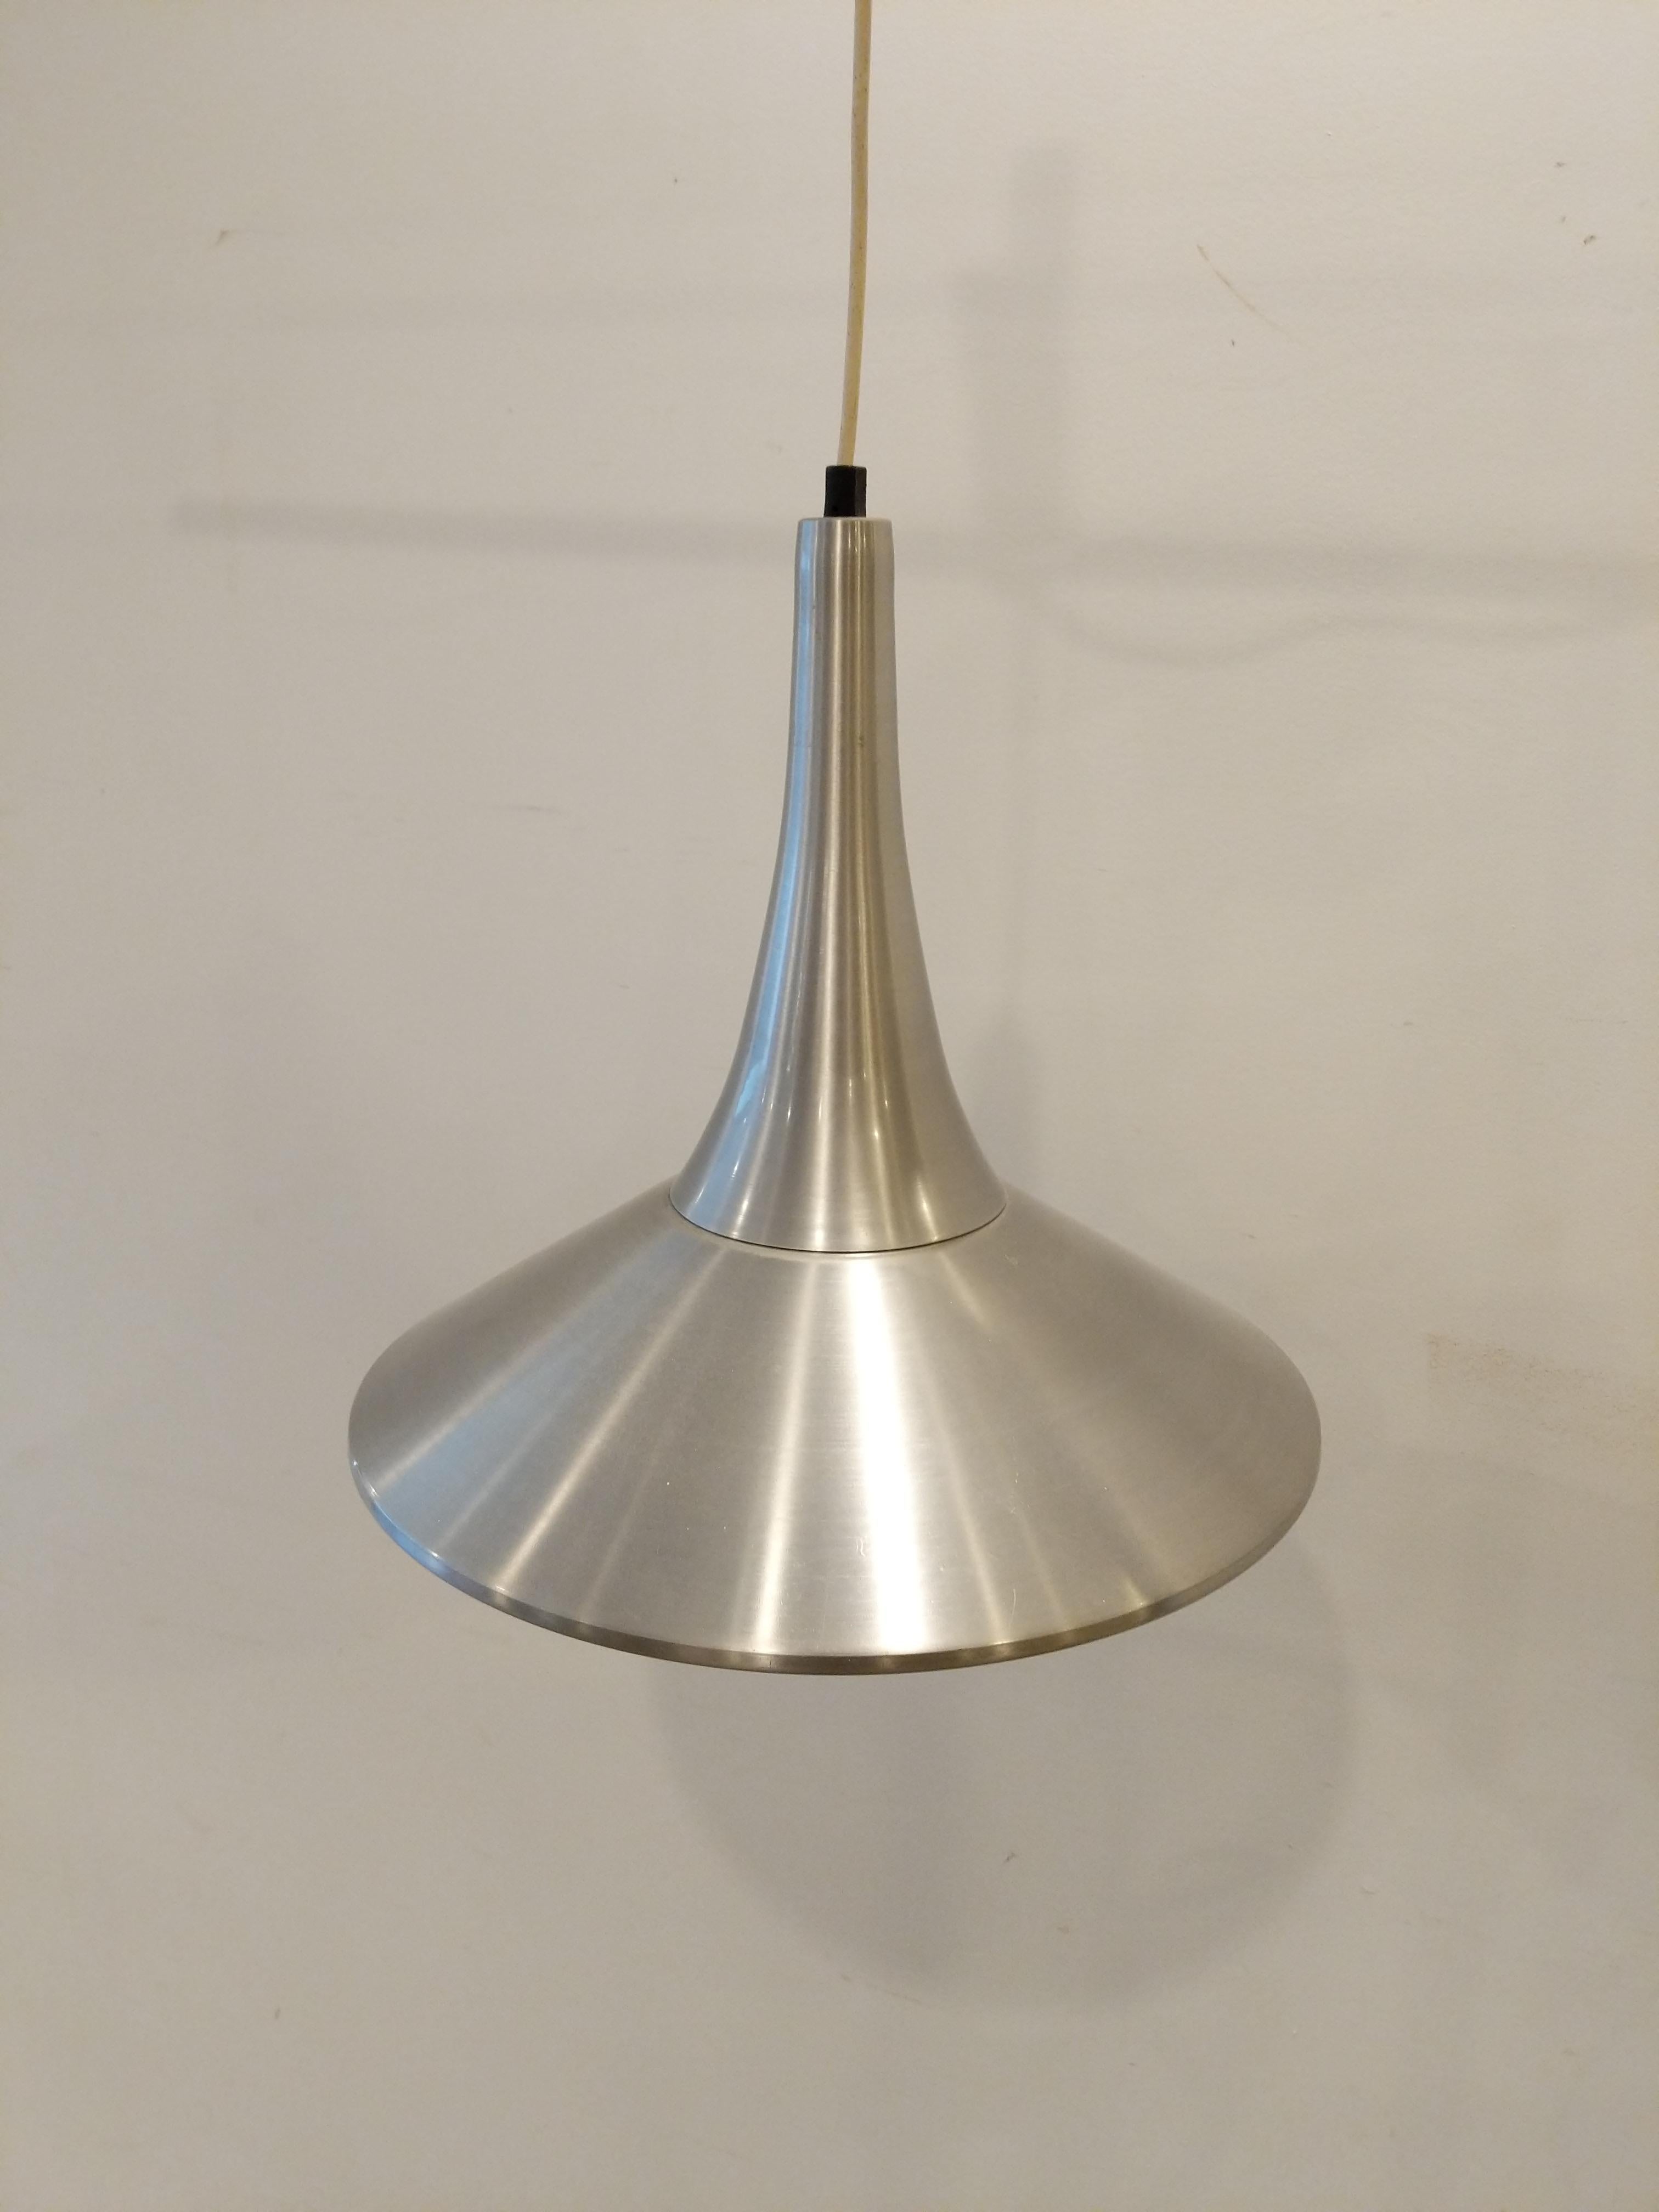 Authentic vintage mid century Danish / Scandinavian Modern hanging lamp / ceiling lamp / pendant light.

Imported directly from Denmark, this lamp is in great shape overall with minor wear from age (see photos).

The lamp is